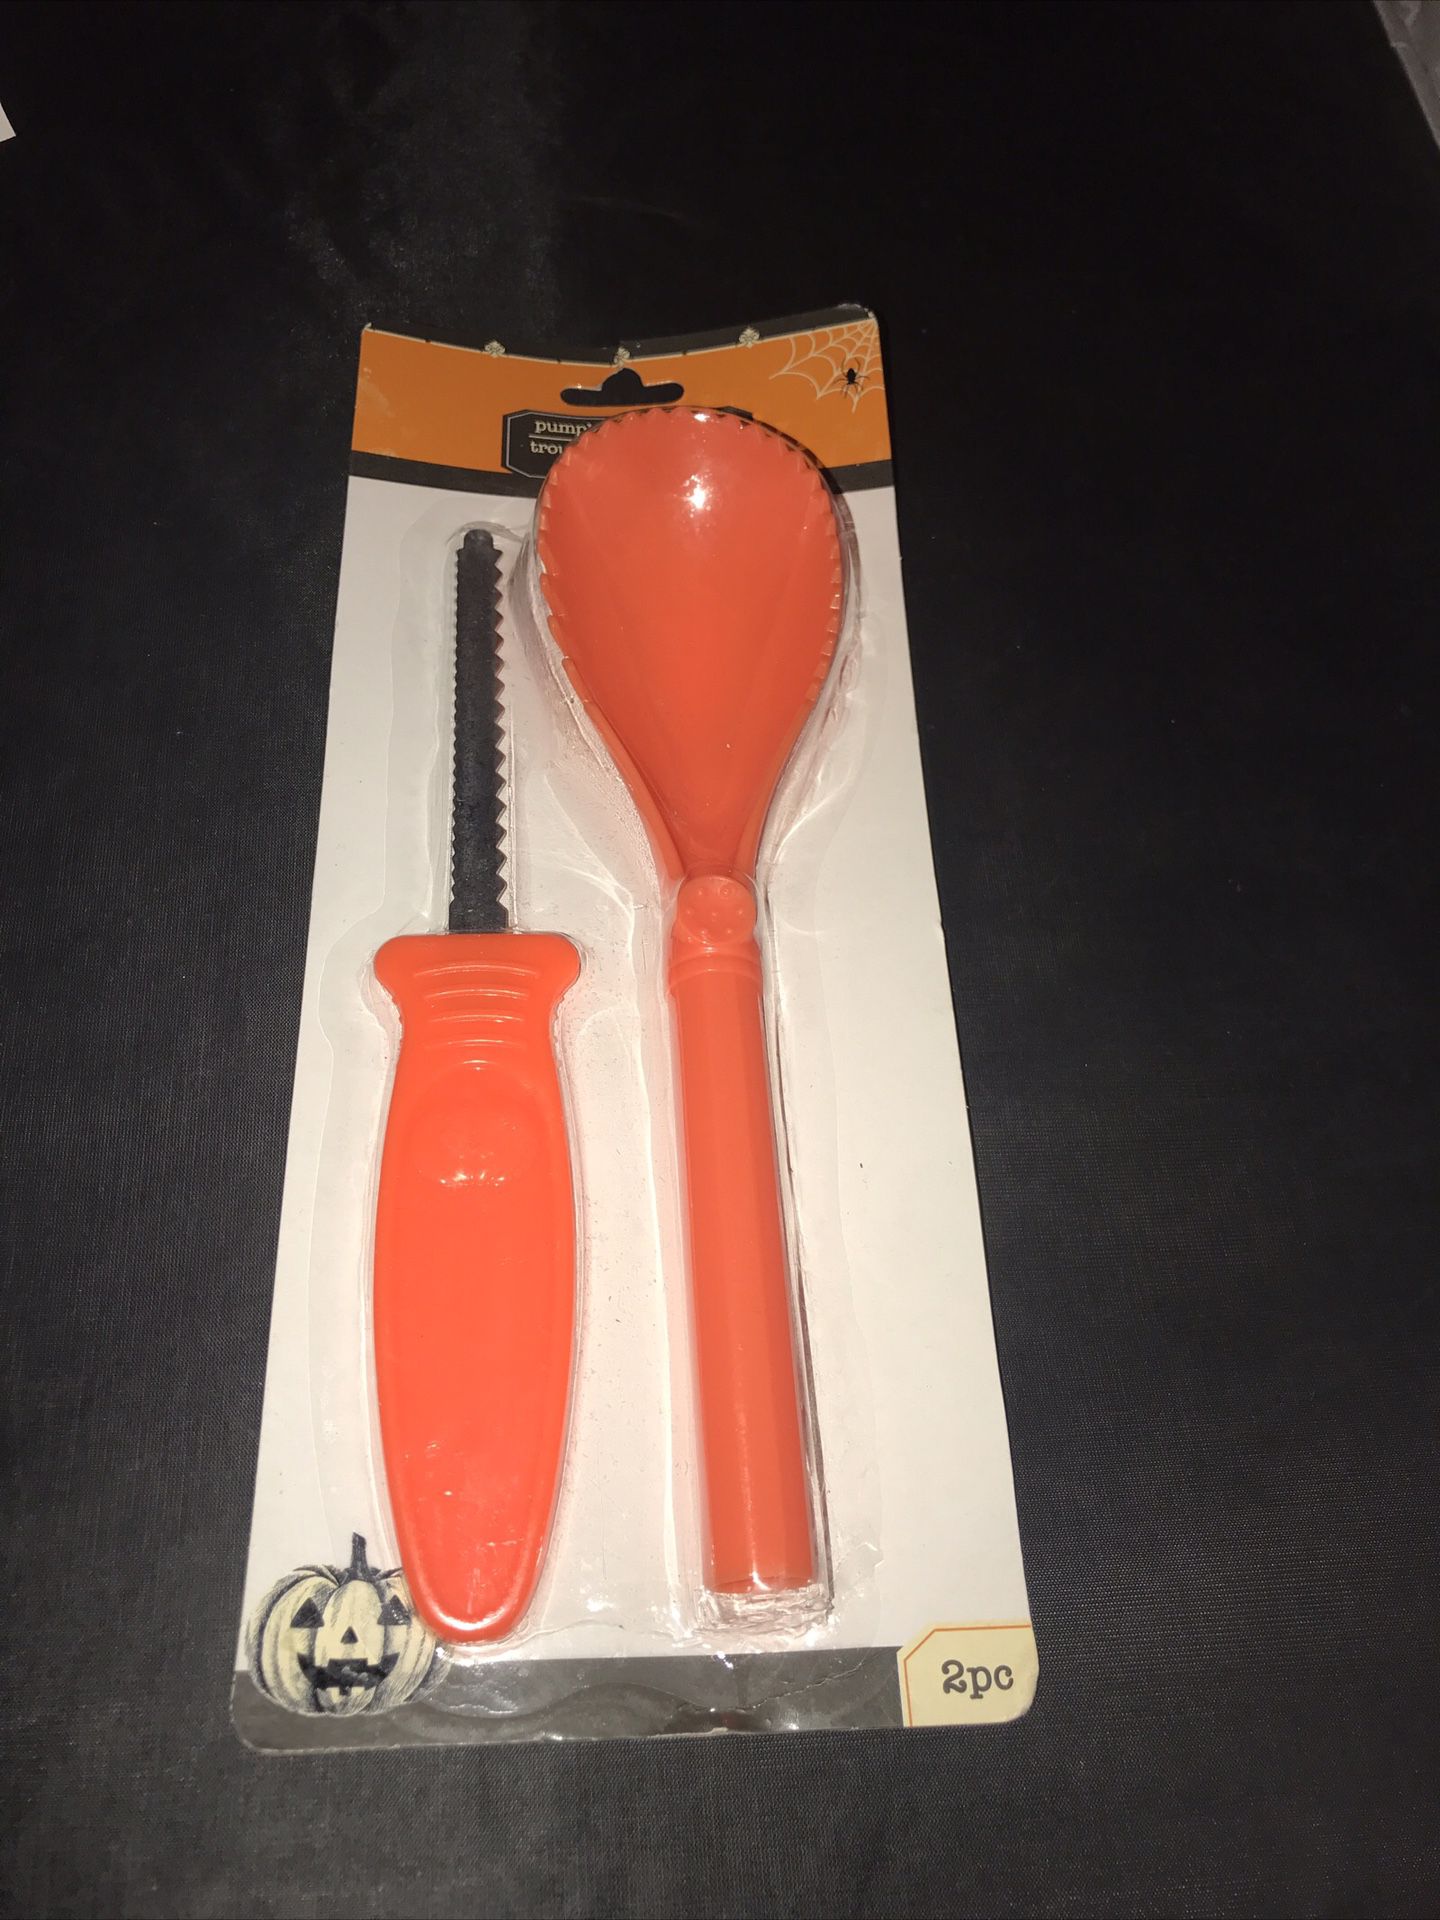 PUMPKIN Carving 2 PC Set with Scooping Spoon and Knife Carving Tool